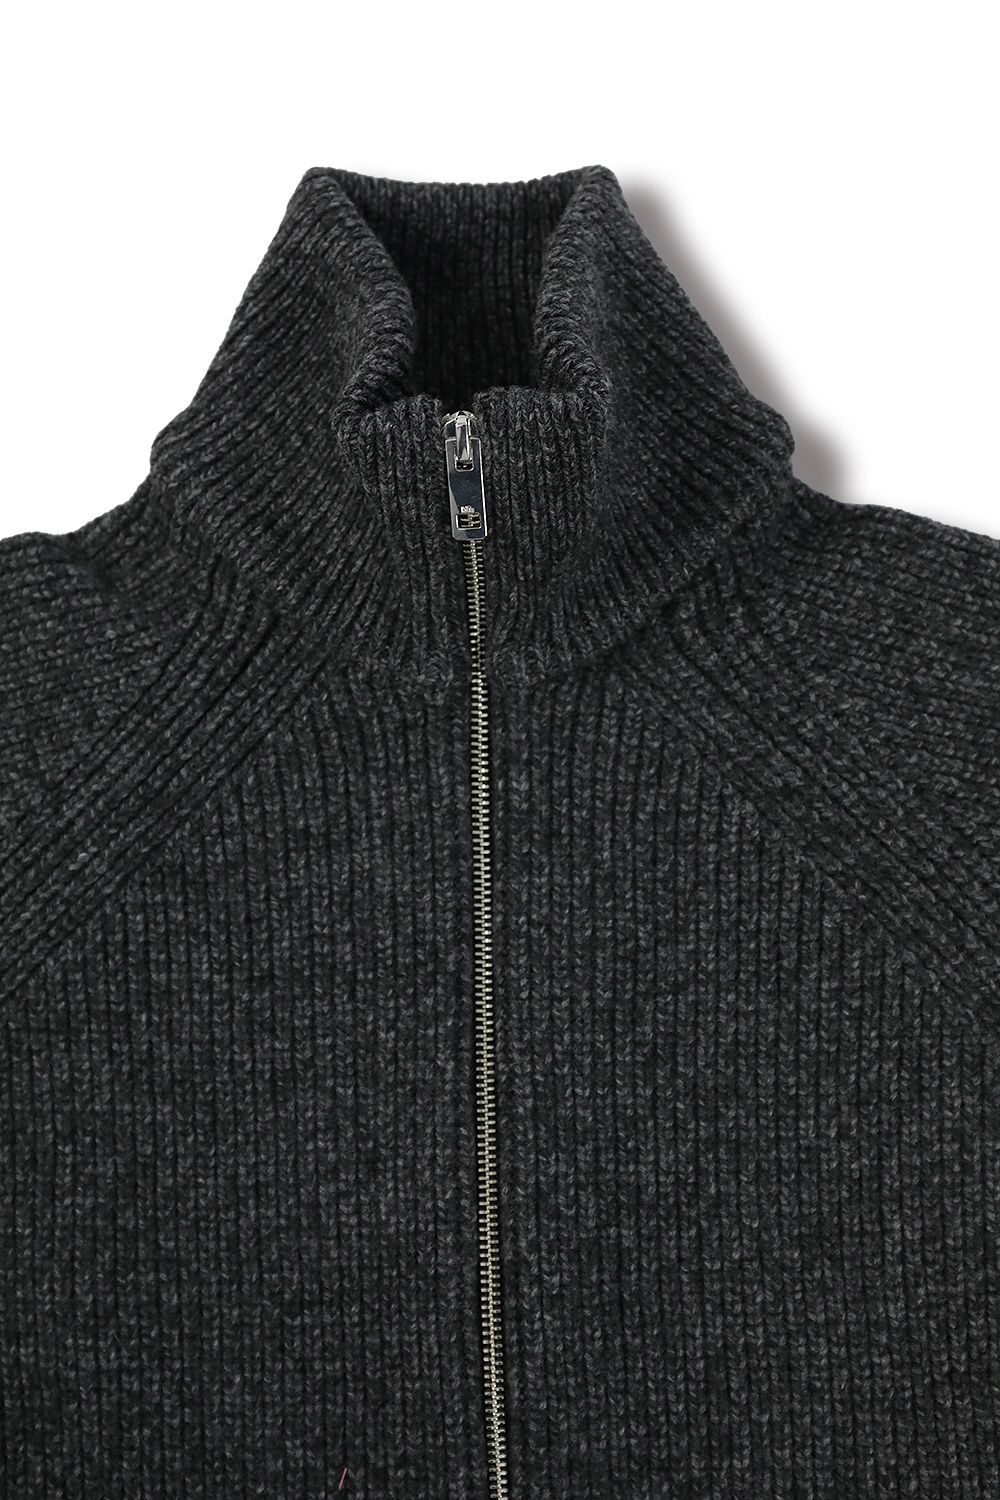 THE RERACS - 【23AW/ラスト1点】RERACS DRIVERS KNIT(TOP